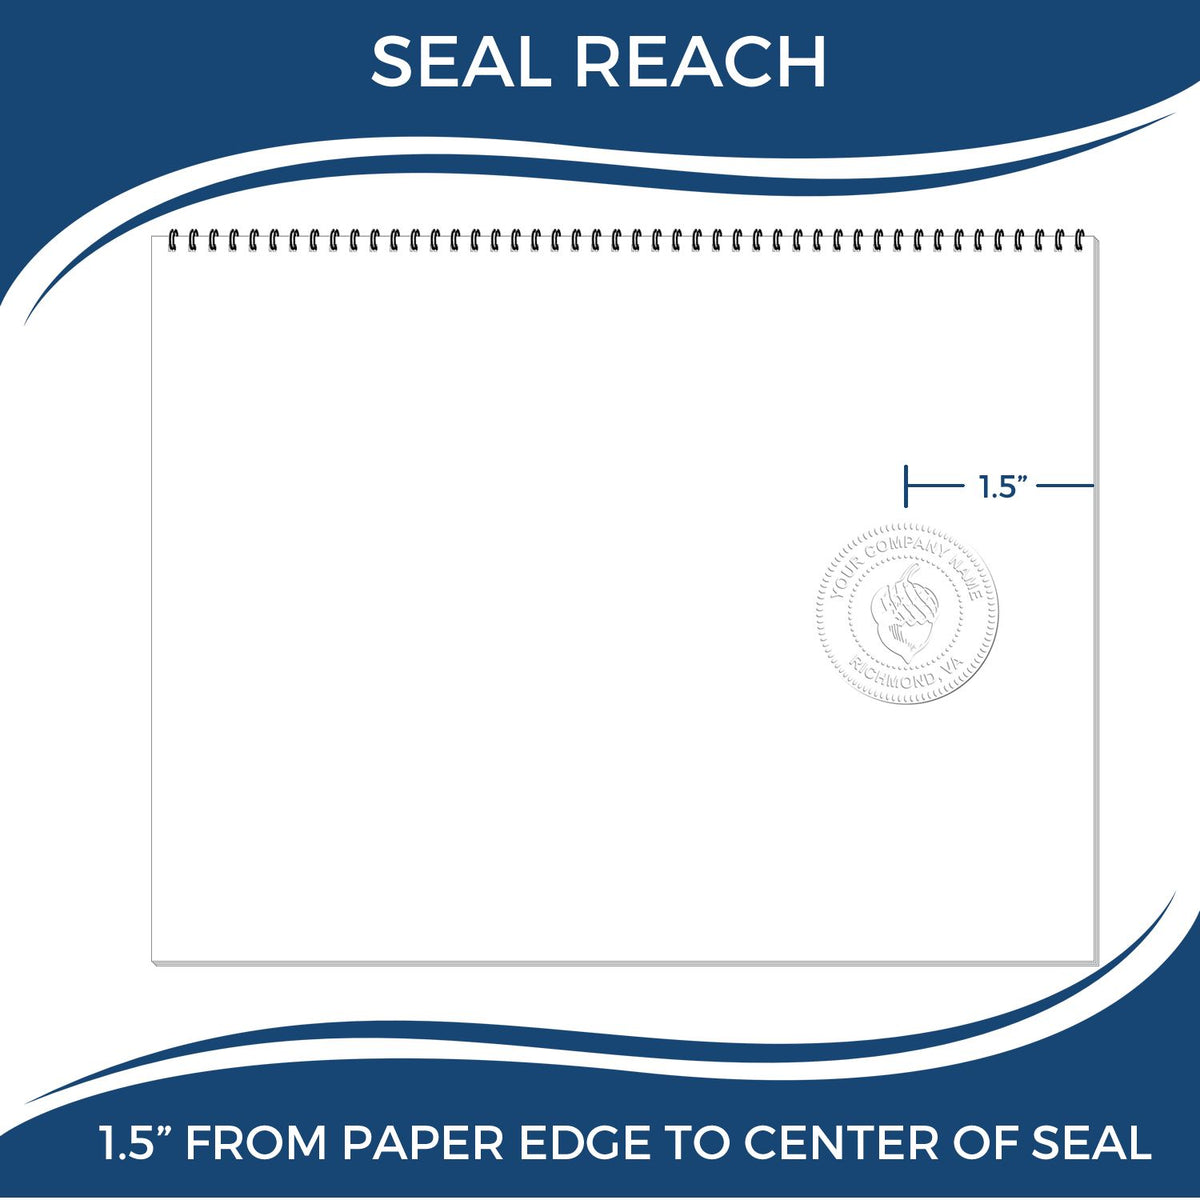 An infographic showing the seal reach which is represented by a ruler and a miniature seal image of the Gift Kansas Land Surveyor Seal